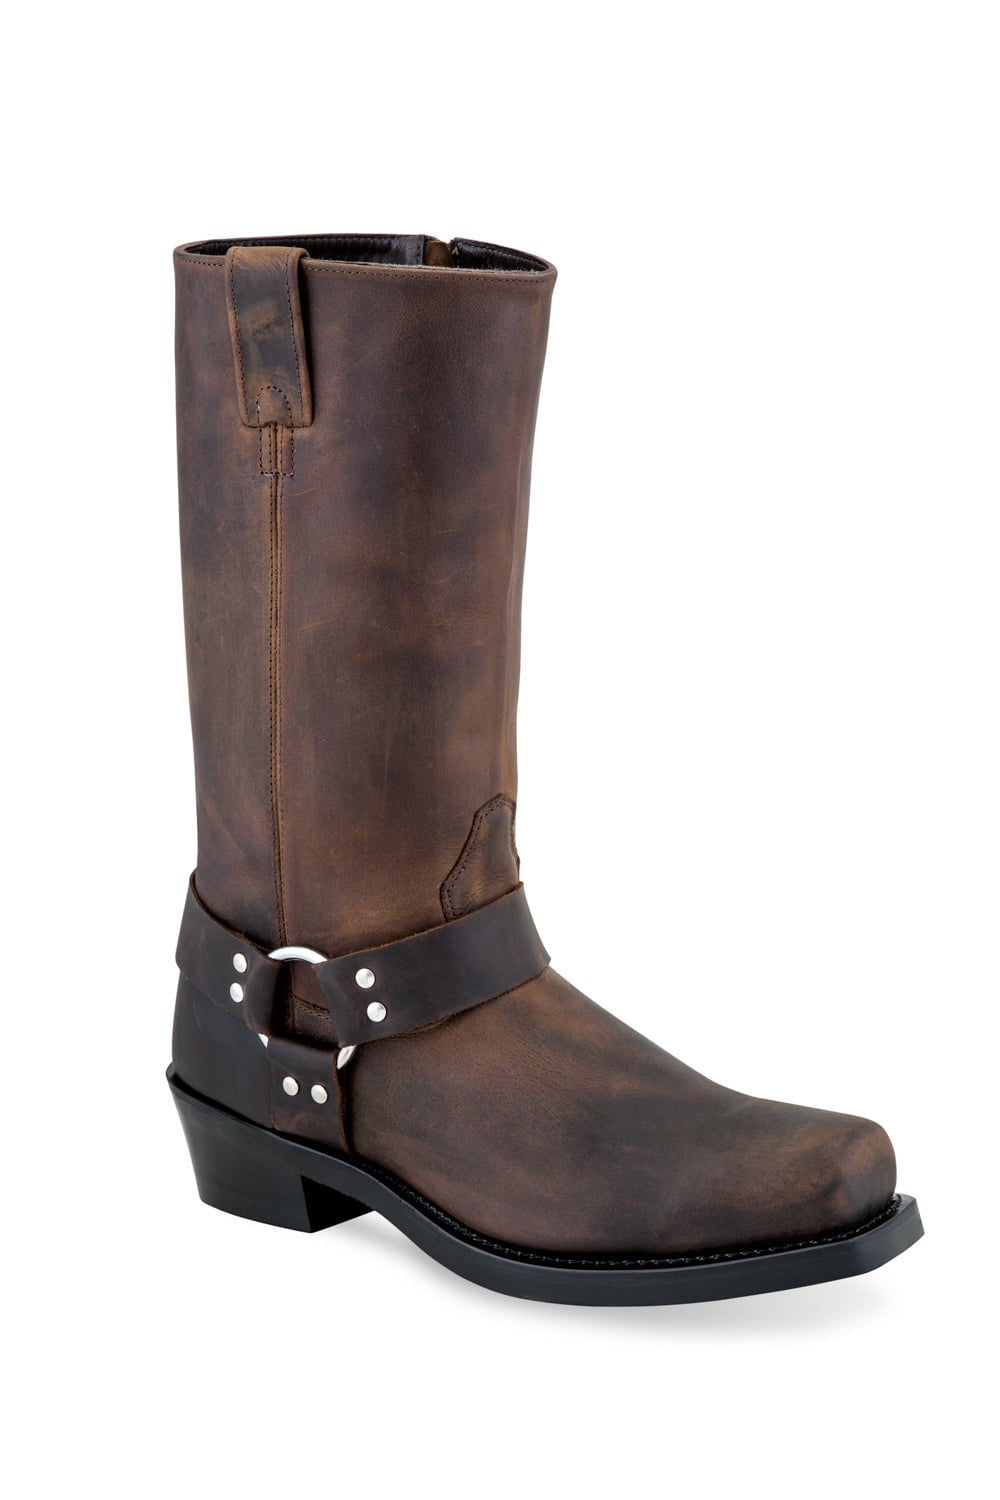 western style motorcycle boots